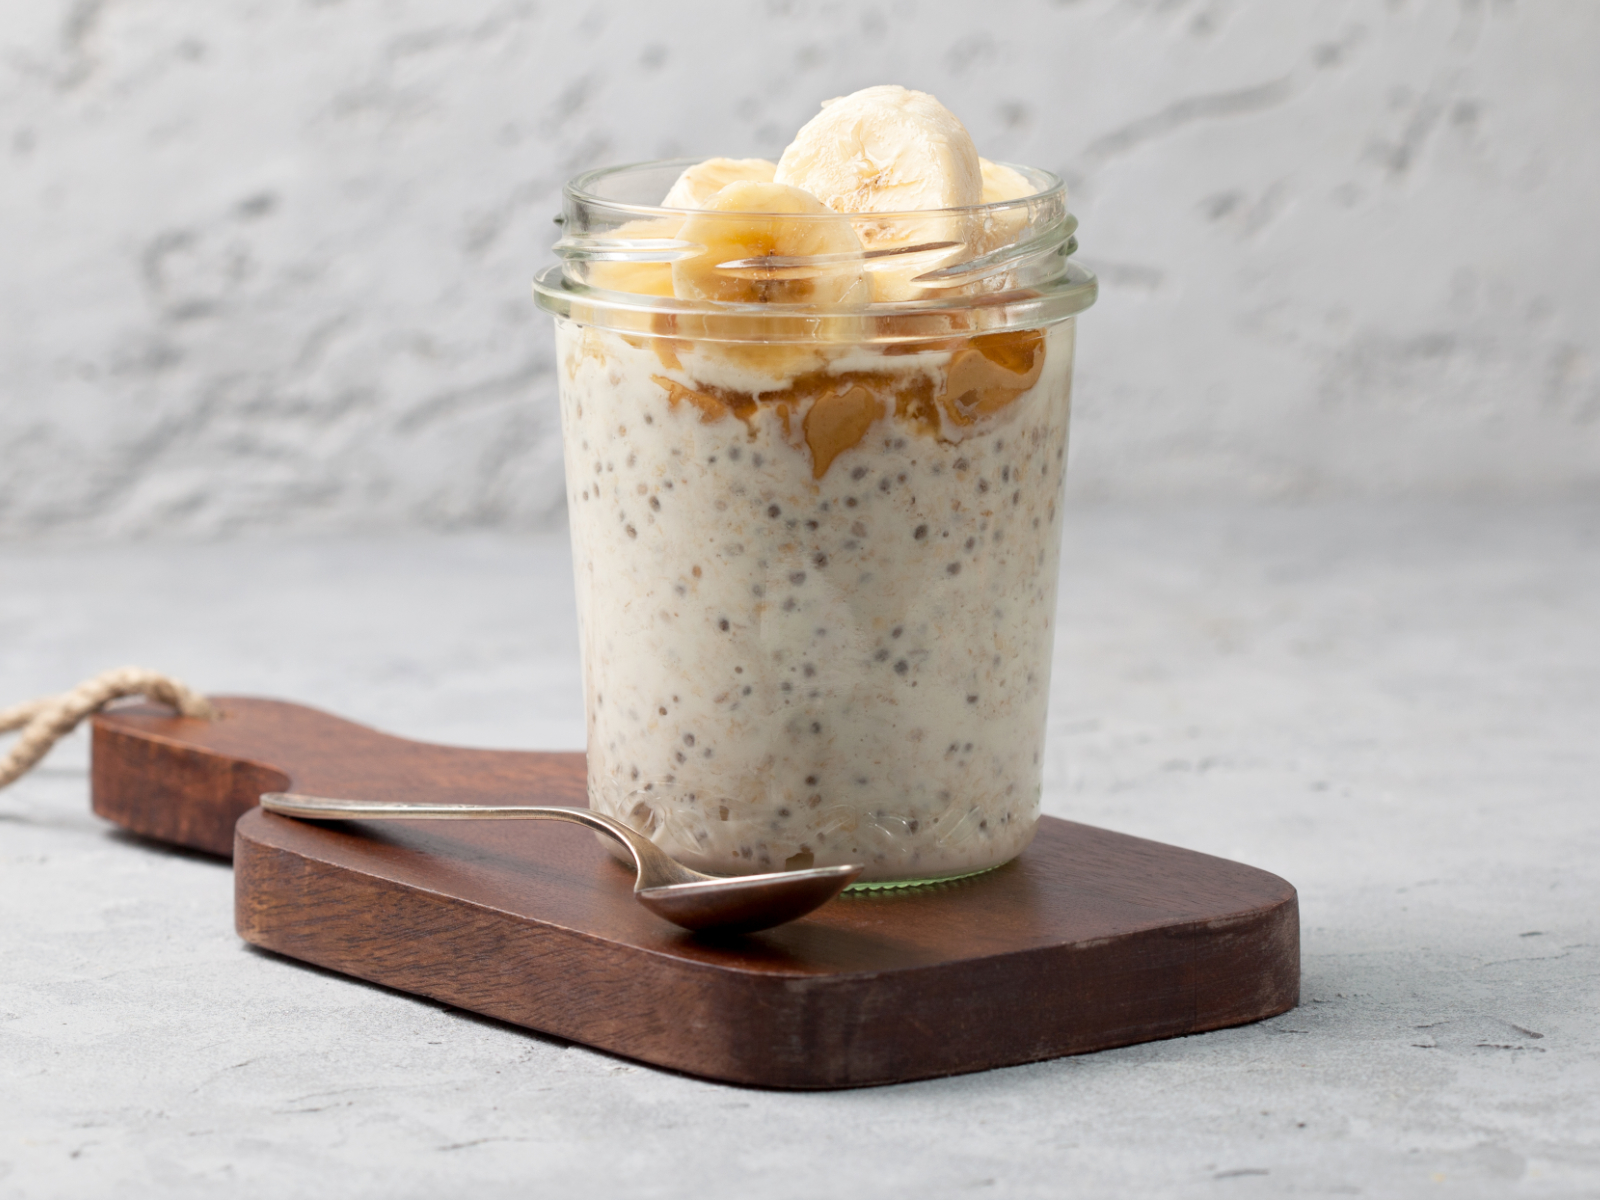 Overnight oats with banana and almond or peanut butter